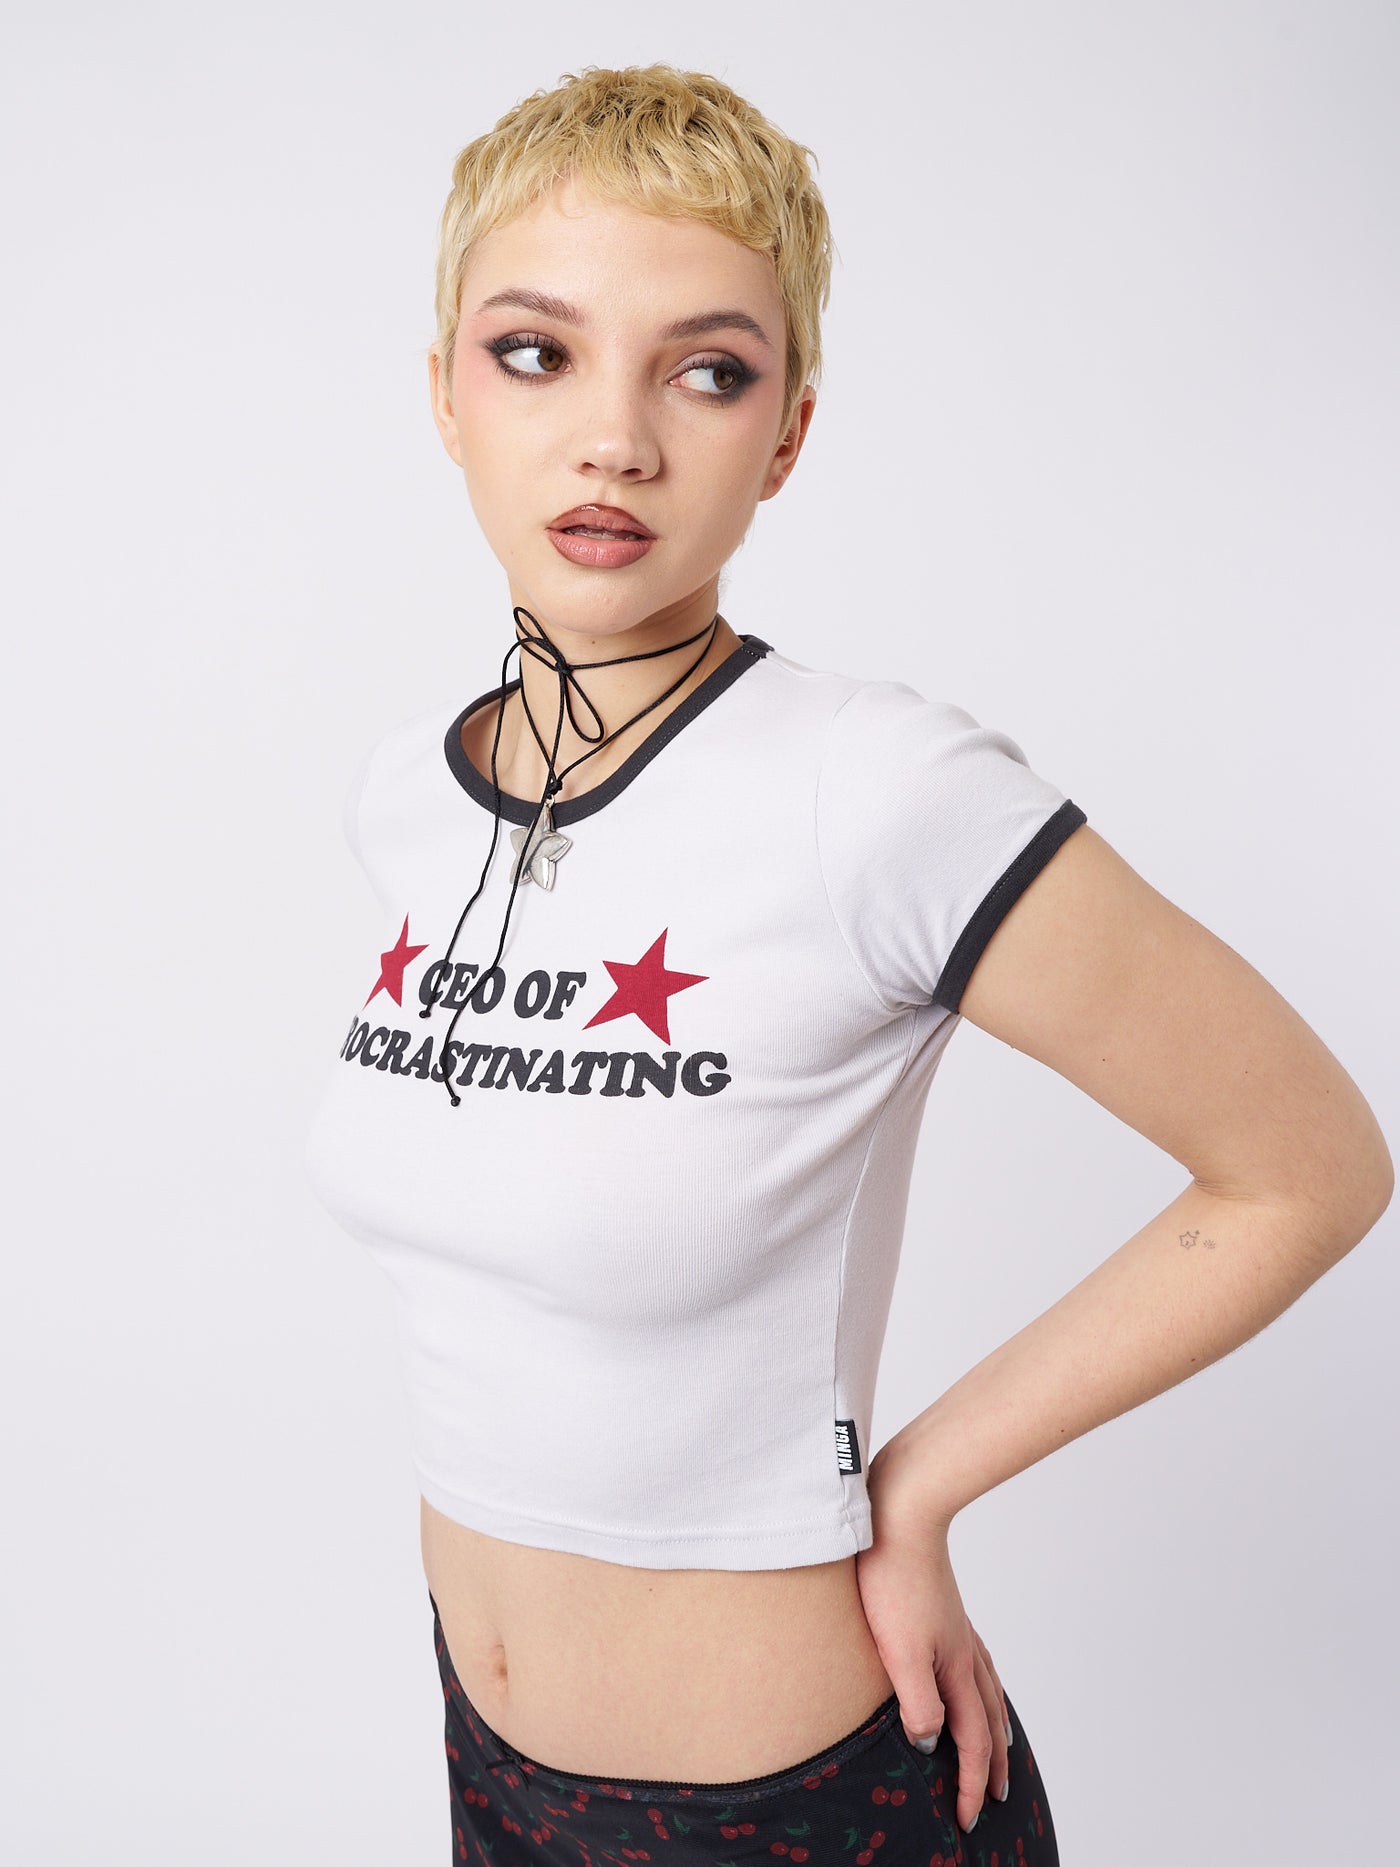 A baby tee with the text "CEO Of Procrastinating" by Minga London. This tee combines a playful and humorous design with a cool and casual style, perfect for expressing your laid-back and relatable personality.